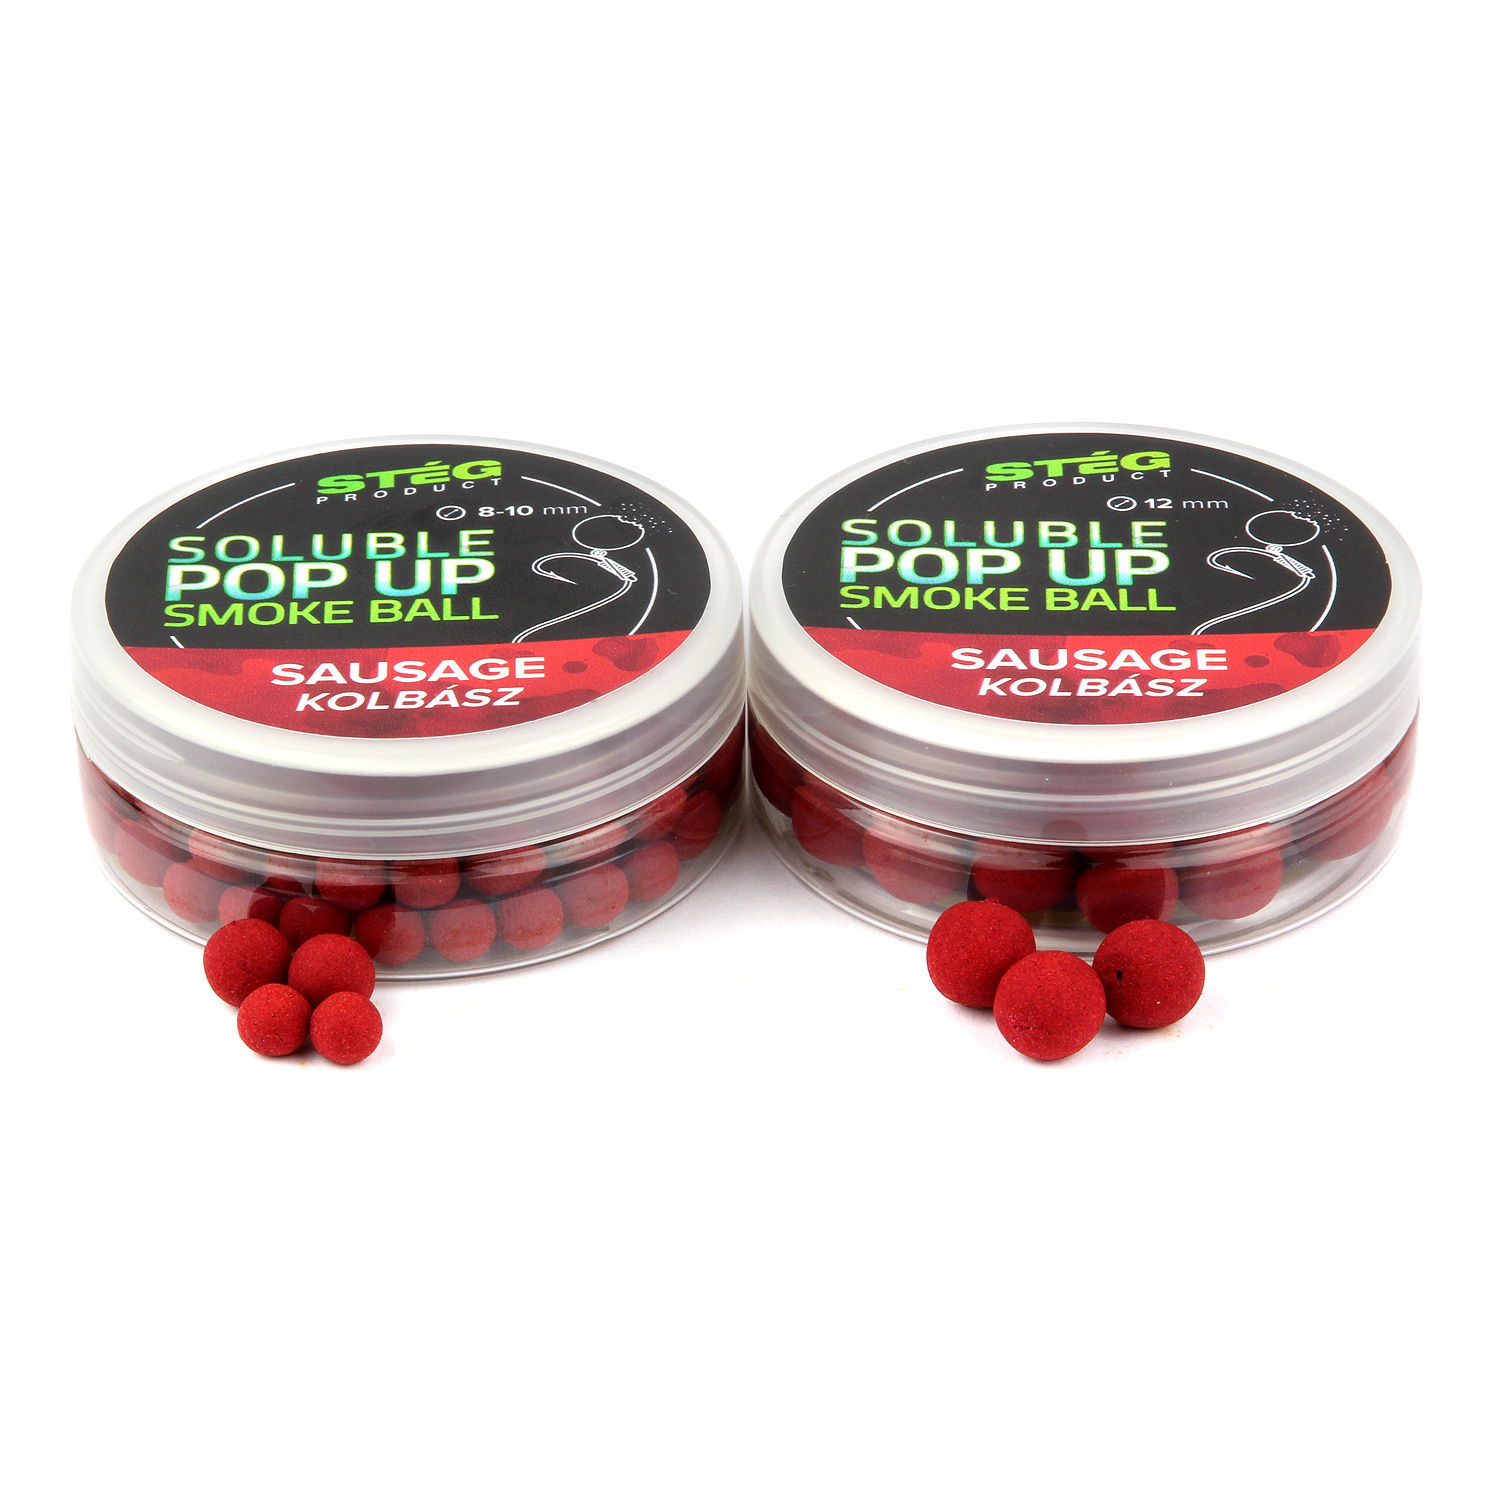 Stg Product Soluble Pop Up Smoke Ball 12mm Sausage 25g